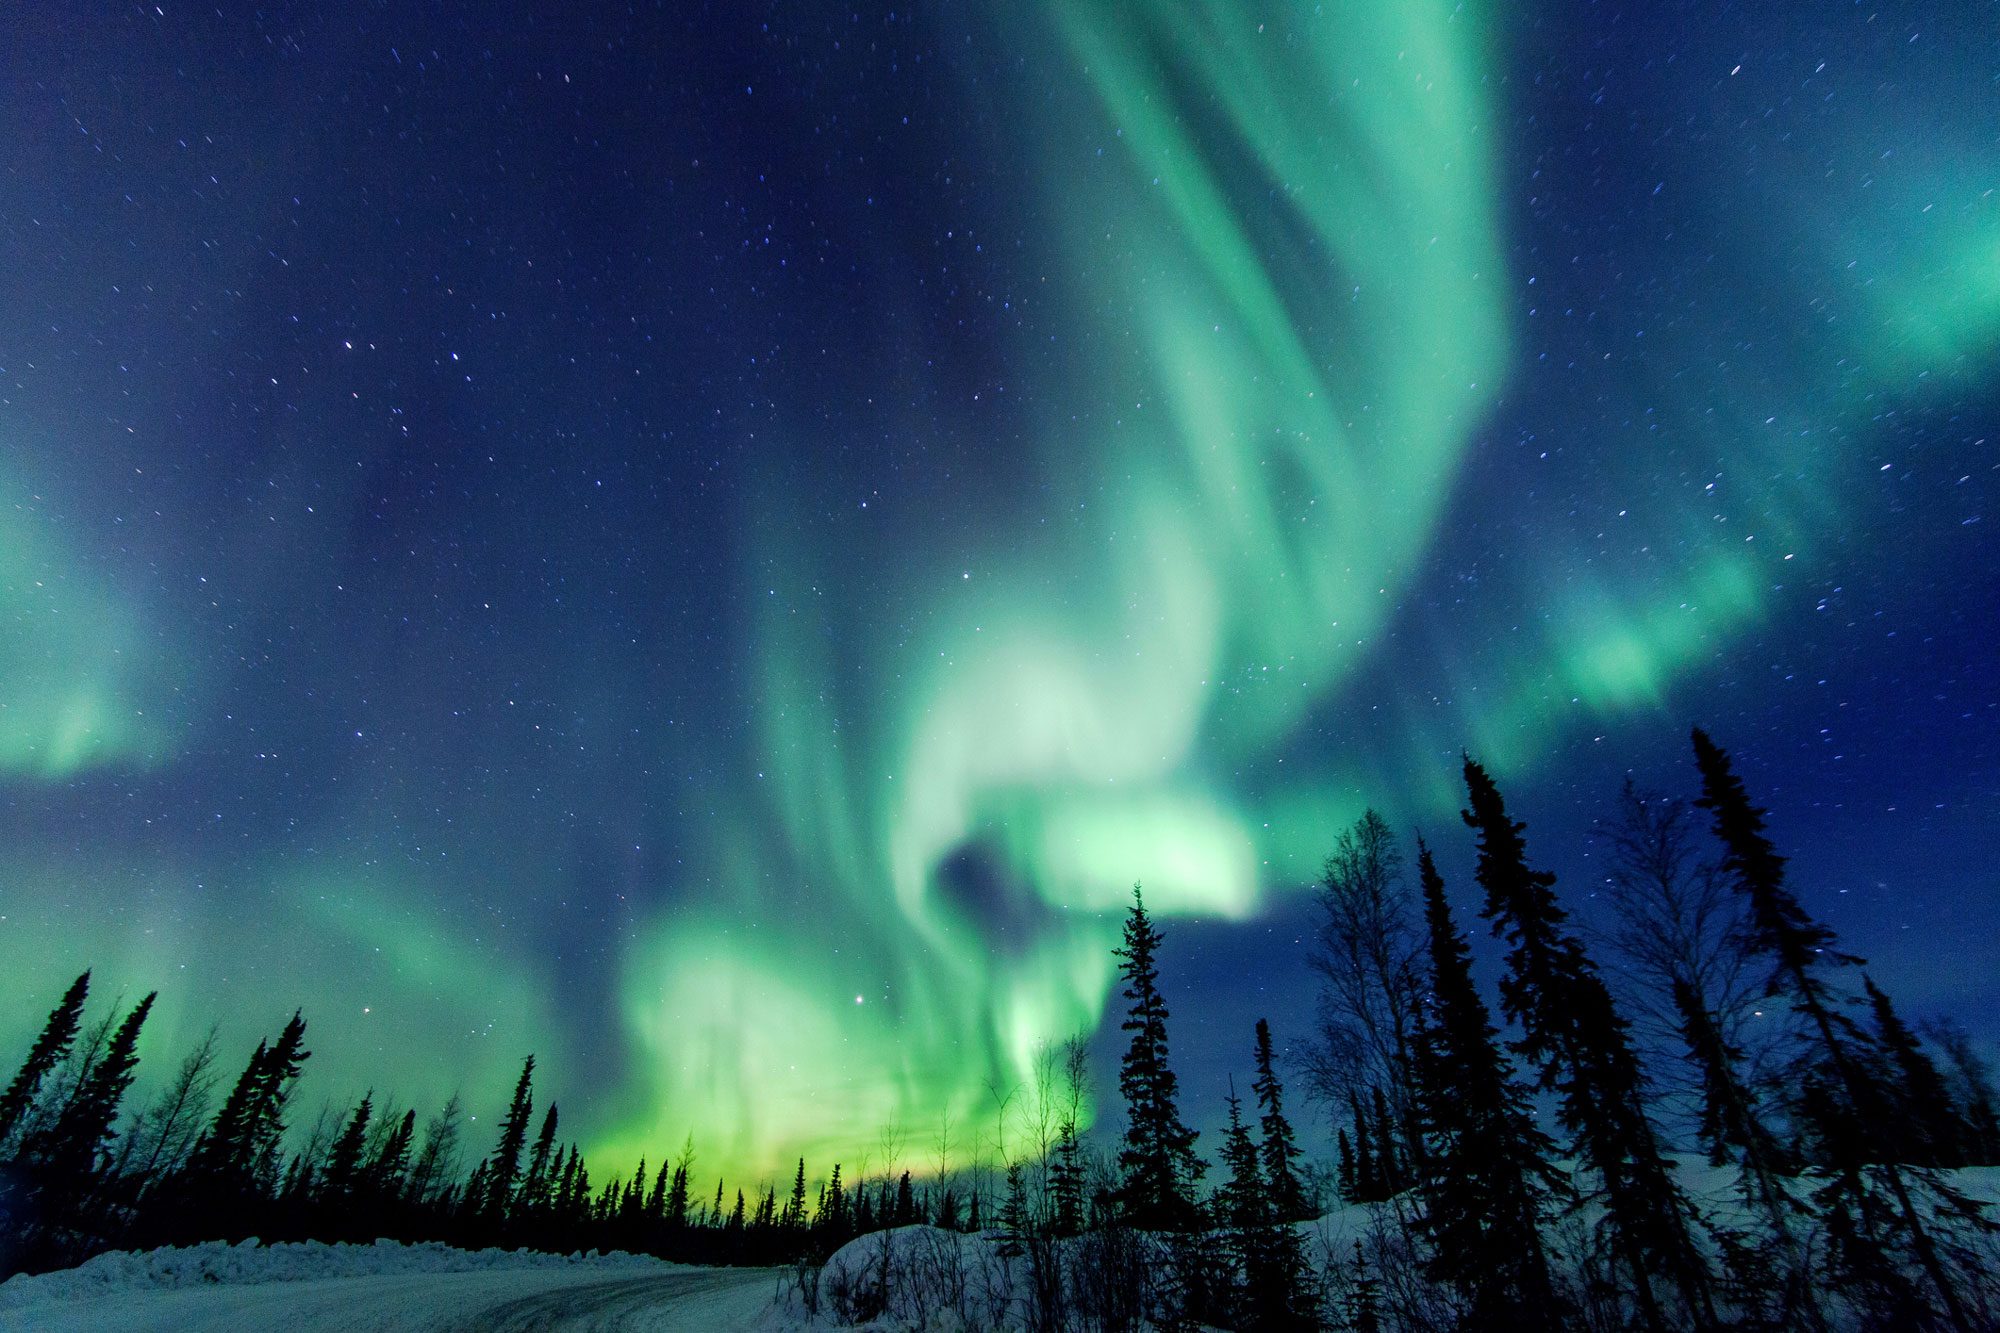 <p><strong>Why you should go:</strong> An almost-guaranteed opportunity to see the northern lights during the "solar max"</p> <p>There are two truths about seeing the <a href="https://www.rd.com/article/where-to-see-northern-lights/" rel="noopener noreferrer">northern lights</a>: They're beautiful, and they're elusive. Unlike the solar eclipse, there's no date or time that you're guaranteed to see the nighttime spectacular. You do need, however, to go north ... in winter ... and then wait. That's why we're so excited about the news from the Northern Territories of Canada, where a "solar max" cycle is going to make it possible to see the aurora borealis with new ease. According to the Canada Tourism Board, in the Northwest Territories, "travelers have a 98% chance of witnessing the spectacle" during a three-night stay November through March, when longer hours of darkness each day and clear nights make it easier to spot the lights.</p> <p>The jeweled green, purple and gold lights can be seen due to the perfect combination of clear nights, flat landscape, low humidity and the location beneath the earth's auroral oval. Even better, 2024 is the peak of the 11-year solar cycle, which means the light show will be even more dramatic than usual.</p> <p><strong>Where to stay:</strong> The main gateway to the area is Yellowknife, the location of <a href="https://www.tripadvisor.com/Attraction_Review-g154966-d586758-Reviews-Aurora_Village-Yellowknife_Northwest_Territories.html" rel="noopener noreferrer">Aurora Village</a>, an entirely Indigenous-owned experience that leads guided nighttime tours and where you can go dog sledding and snowshoeing. You can also spend the evening in a cozy teepee, complete with a wood stove, which makes it easy to pop out and see the aurora borealis when it lights up the sky.</p> <p class="listicle-page__cta-button-shop"><a class="shop-btn" href="https://www.tripadvisor.com/Attraction_Review-g154966-d586758-Reviews-Aurora_Village-Yellowknife_Northwest_Territories.html">Book Now</a></p>